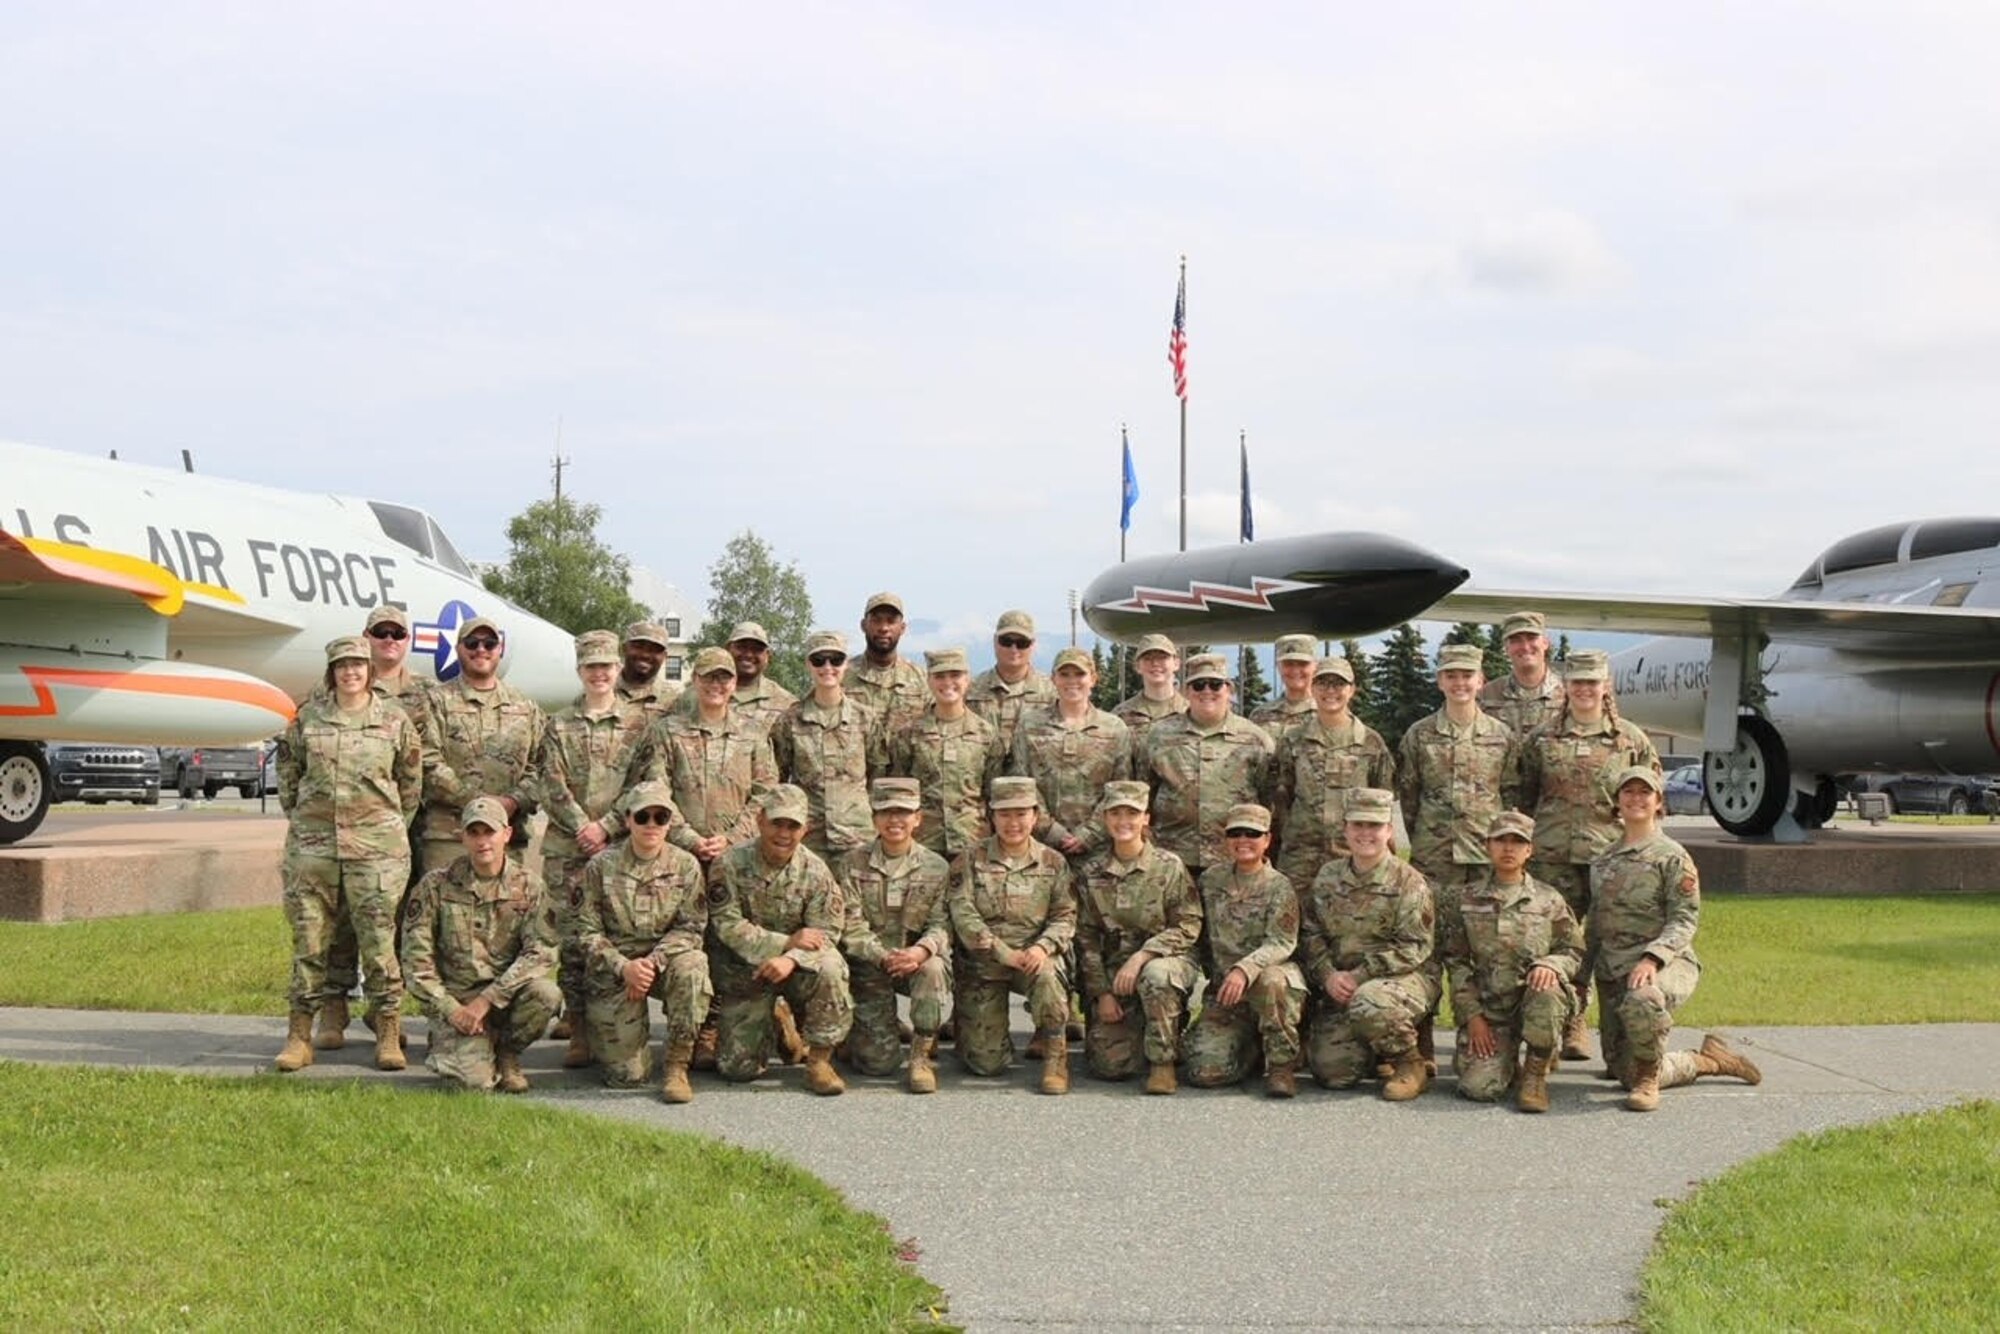 U.S. Air Force Airmen from the 133rd Force Support Squadron pose for a group photo at Joint Base Elmendorf-Richardson, Alaska, July 28, 2023.